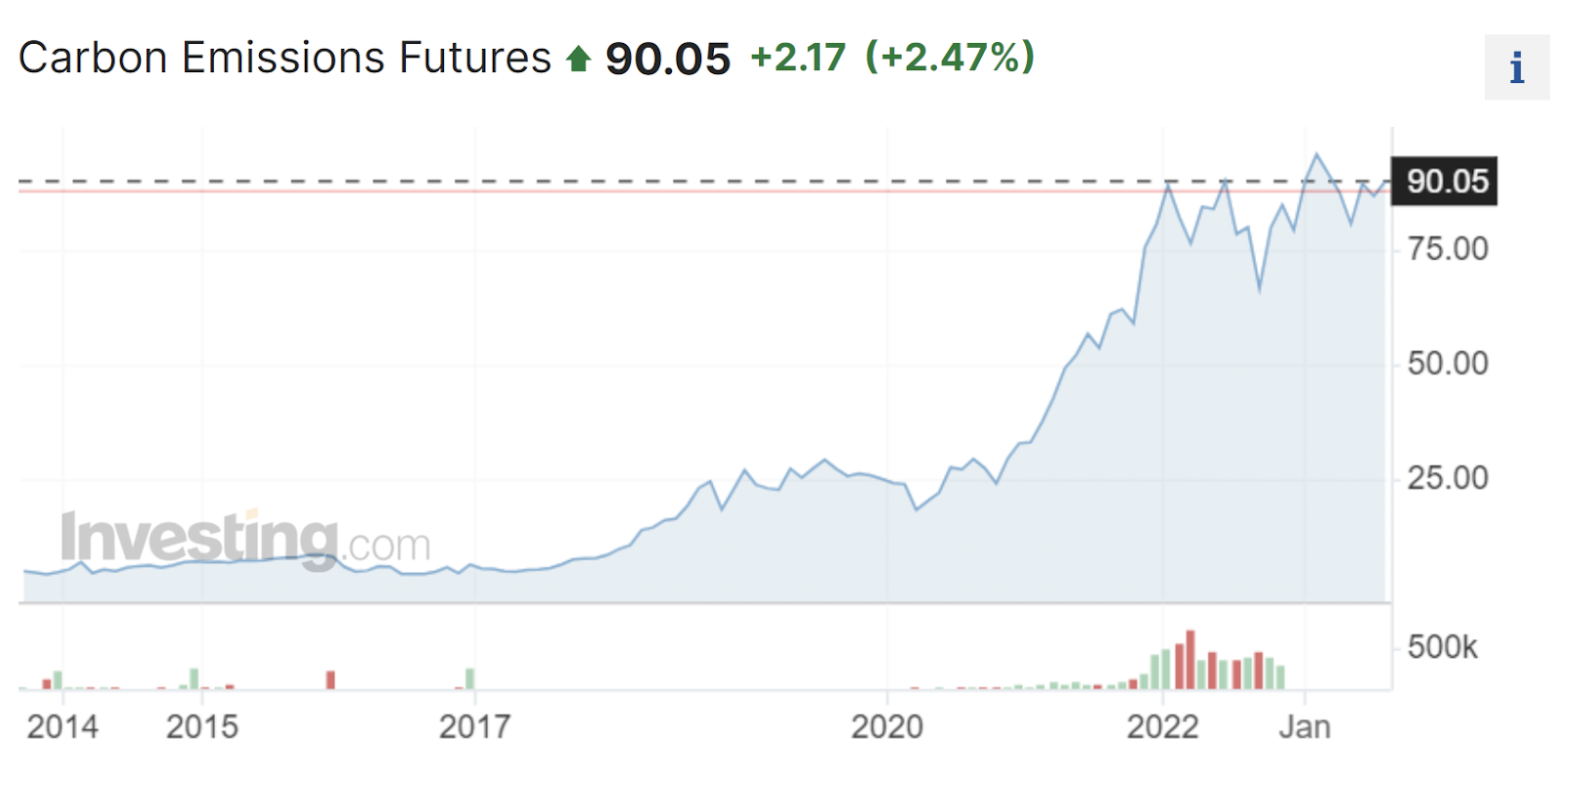 Price chart of carbon emissions futures over the last years. Source: Carbon Emissions Futures Price by Investing.com, used under a fair use rationale.